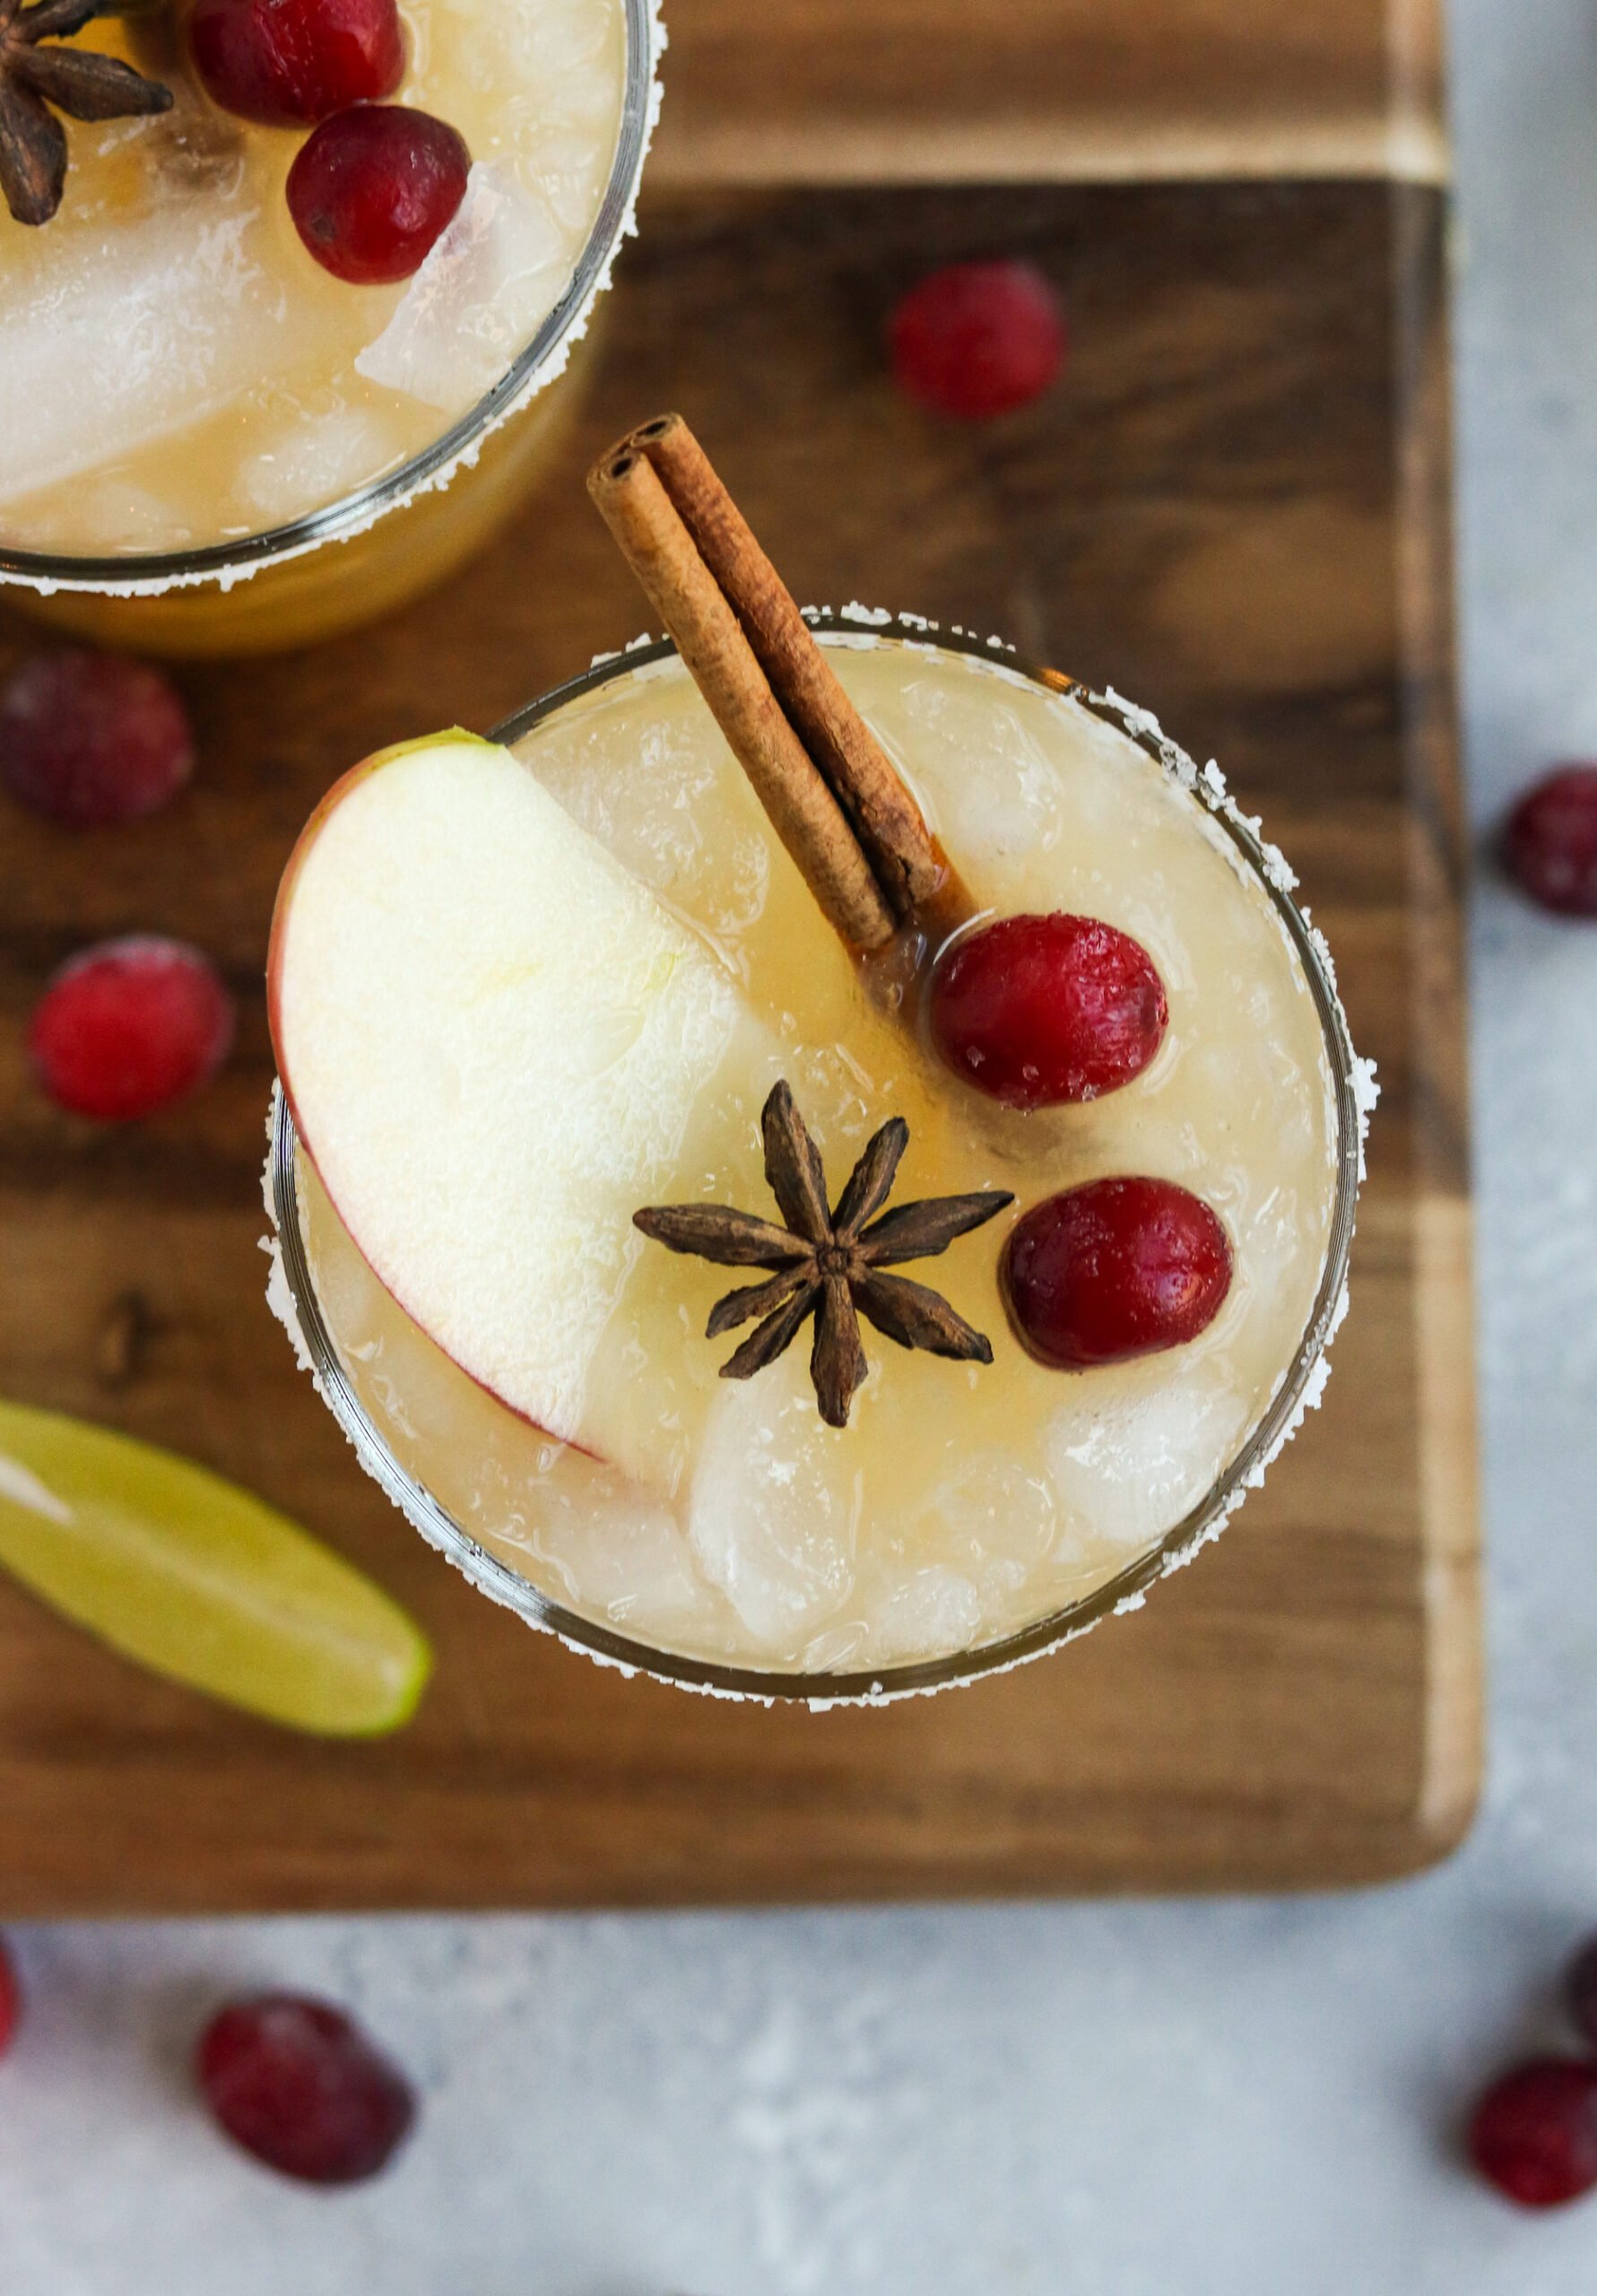 thanksgiving margarita topped with a cinnamon stick, apple slice, and two cranberries